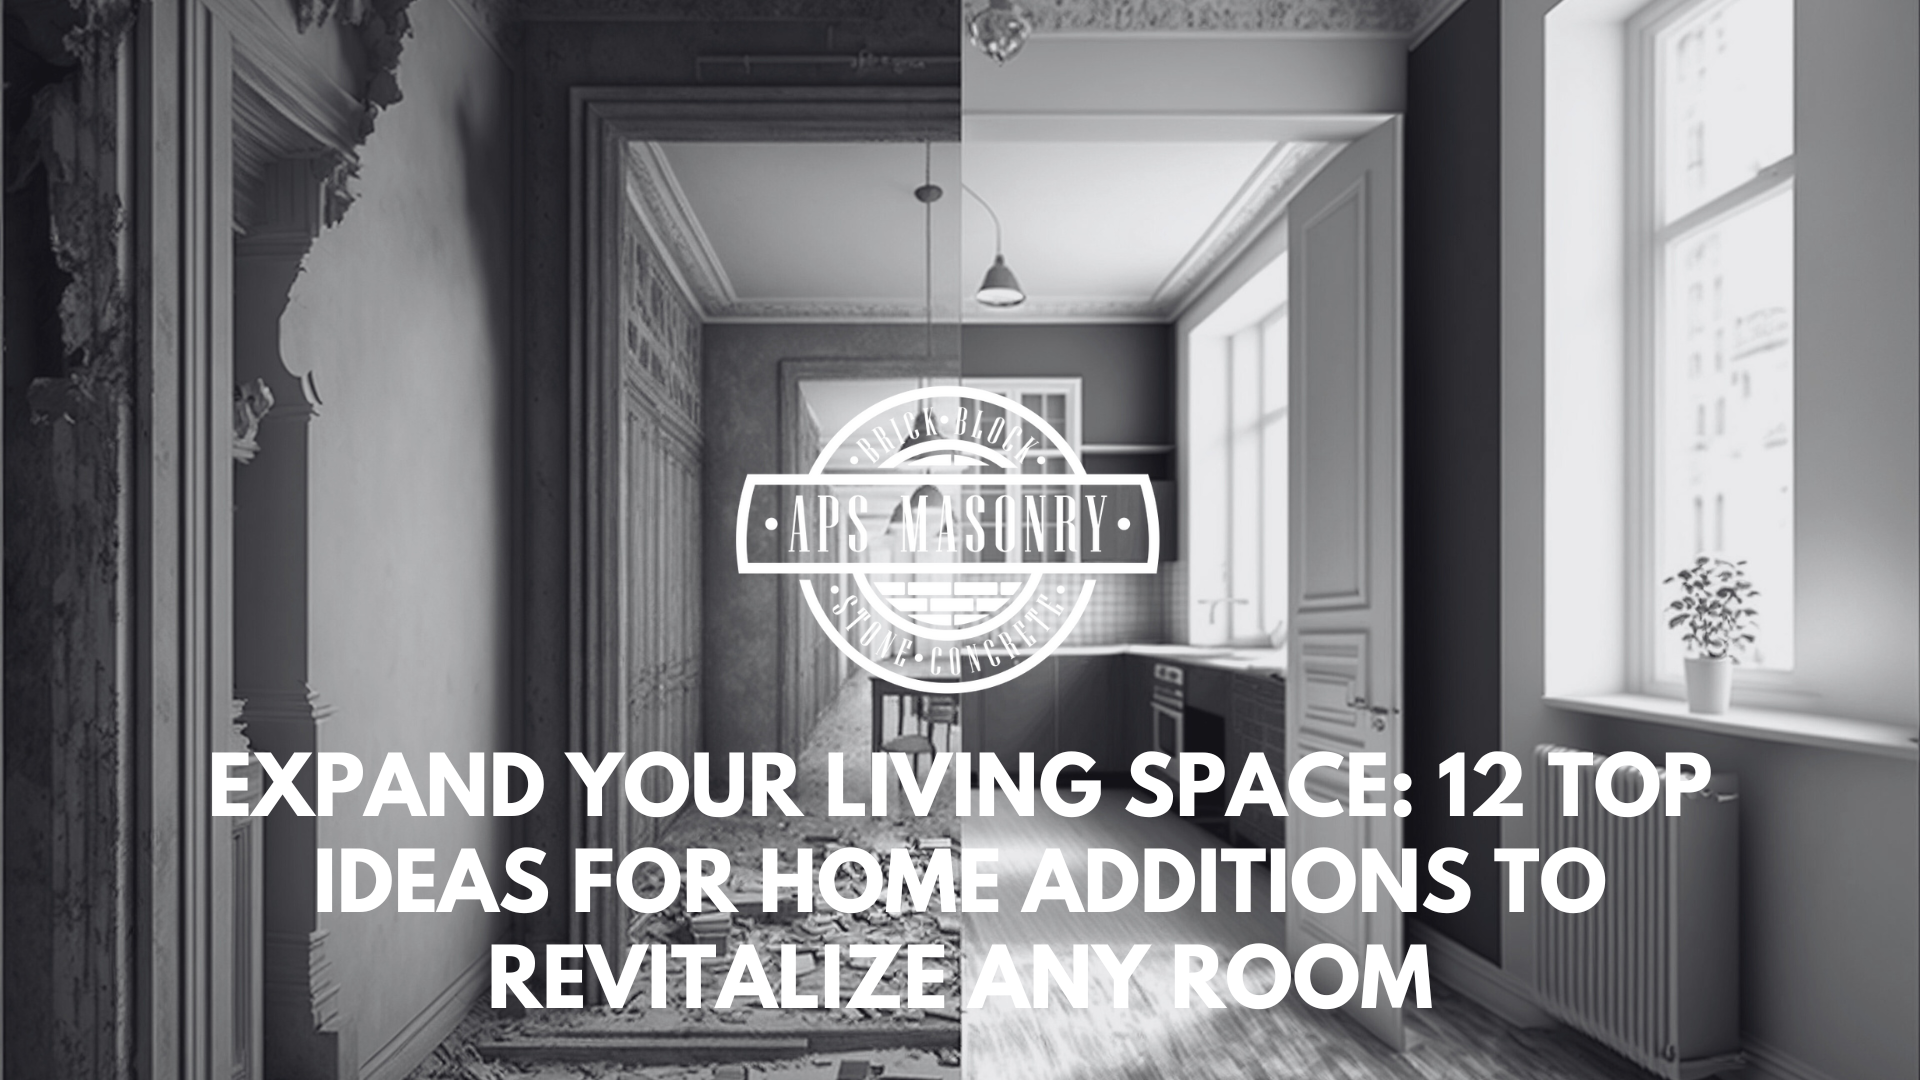 Expand Your Living Space: 12 Top Ideas for Home Additions to Revitalize Any Room